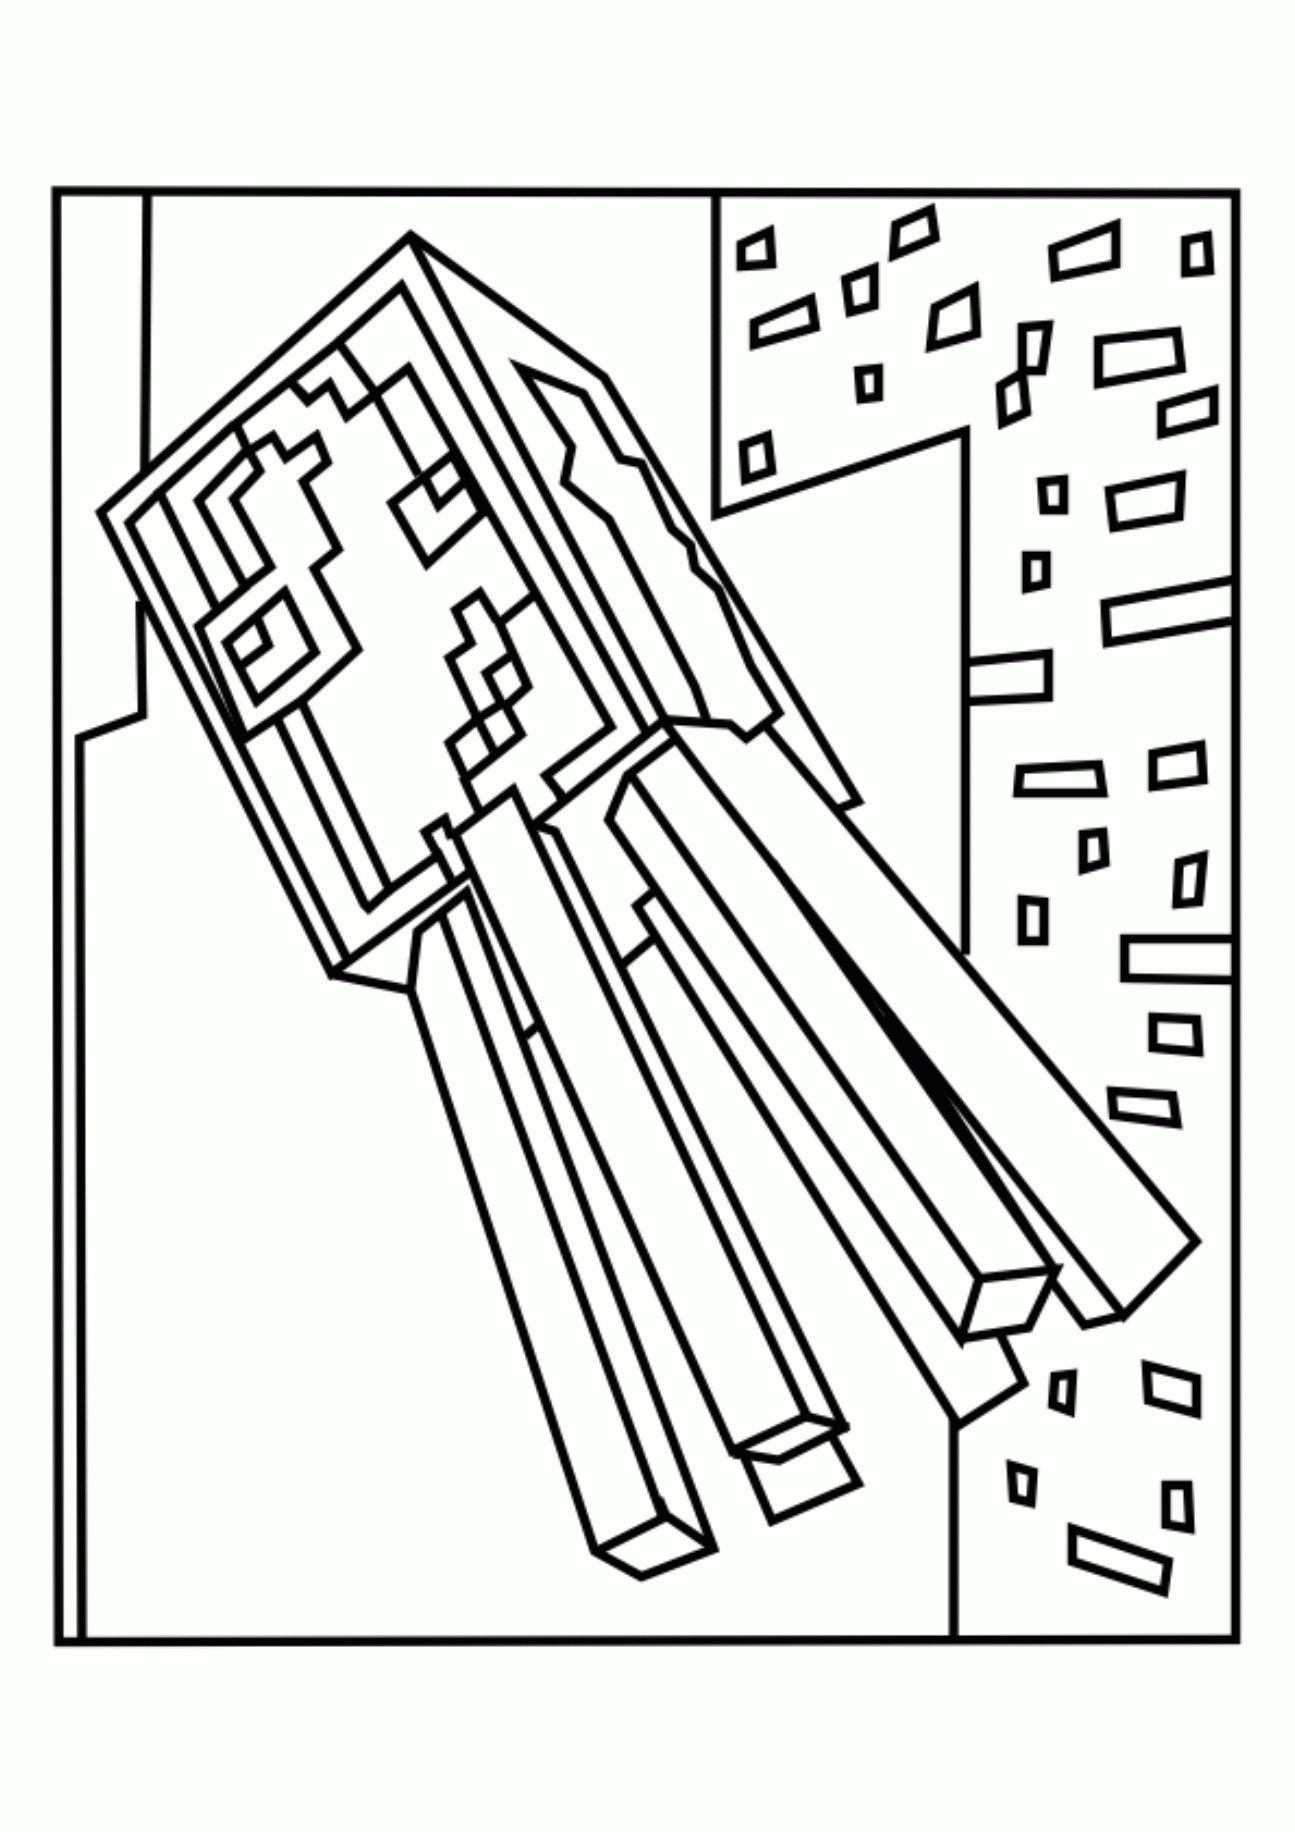 Squid Coloring Pages Printable Best Minecraft Squid And Spider Coloring Pages Free Printable